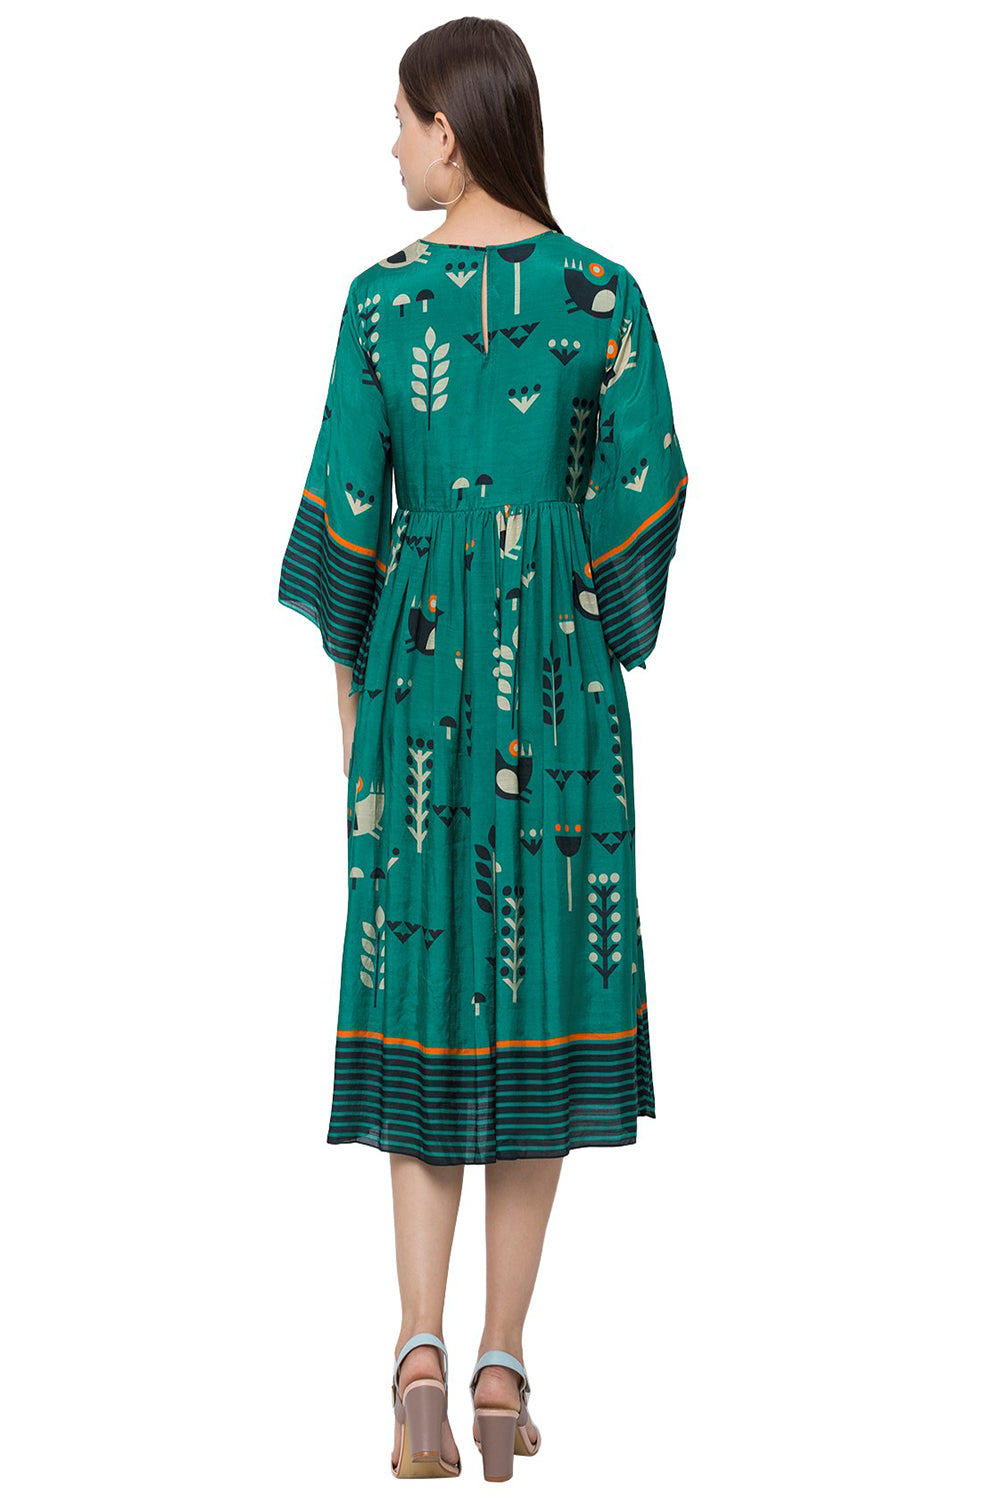 Bird Printed Dress With Waist Gathers And Bell Sleeves